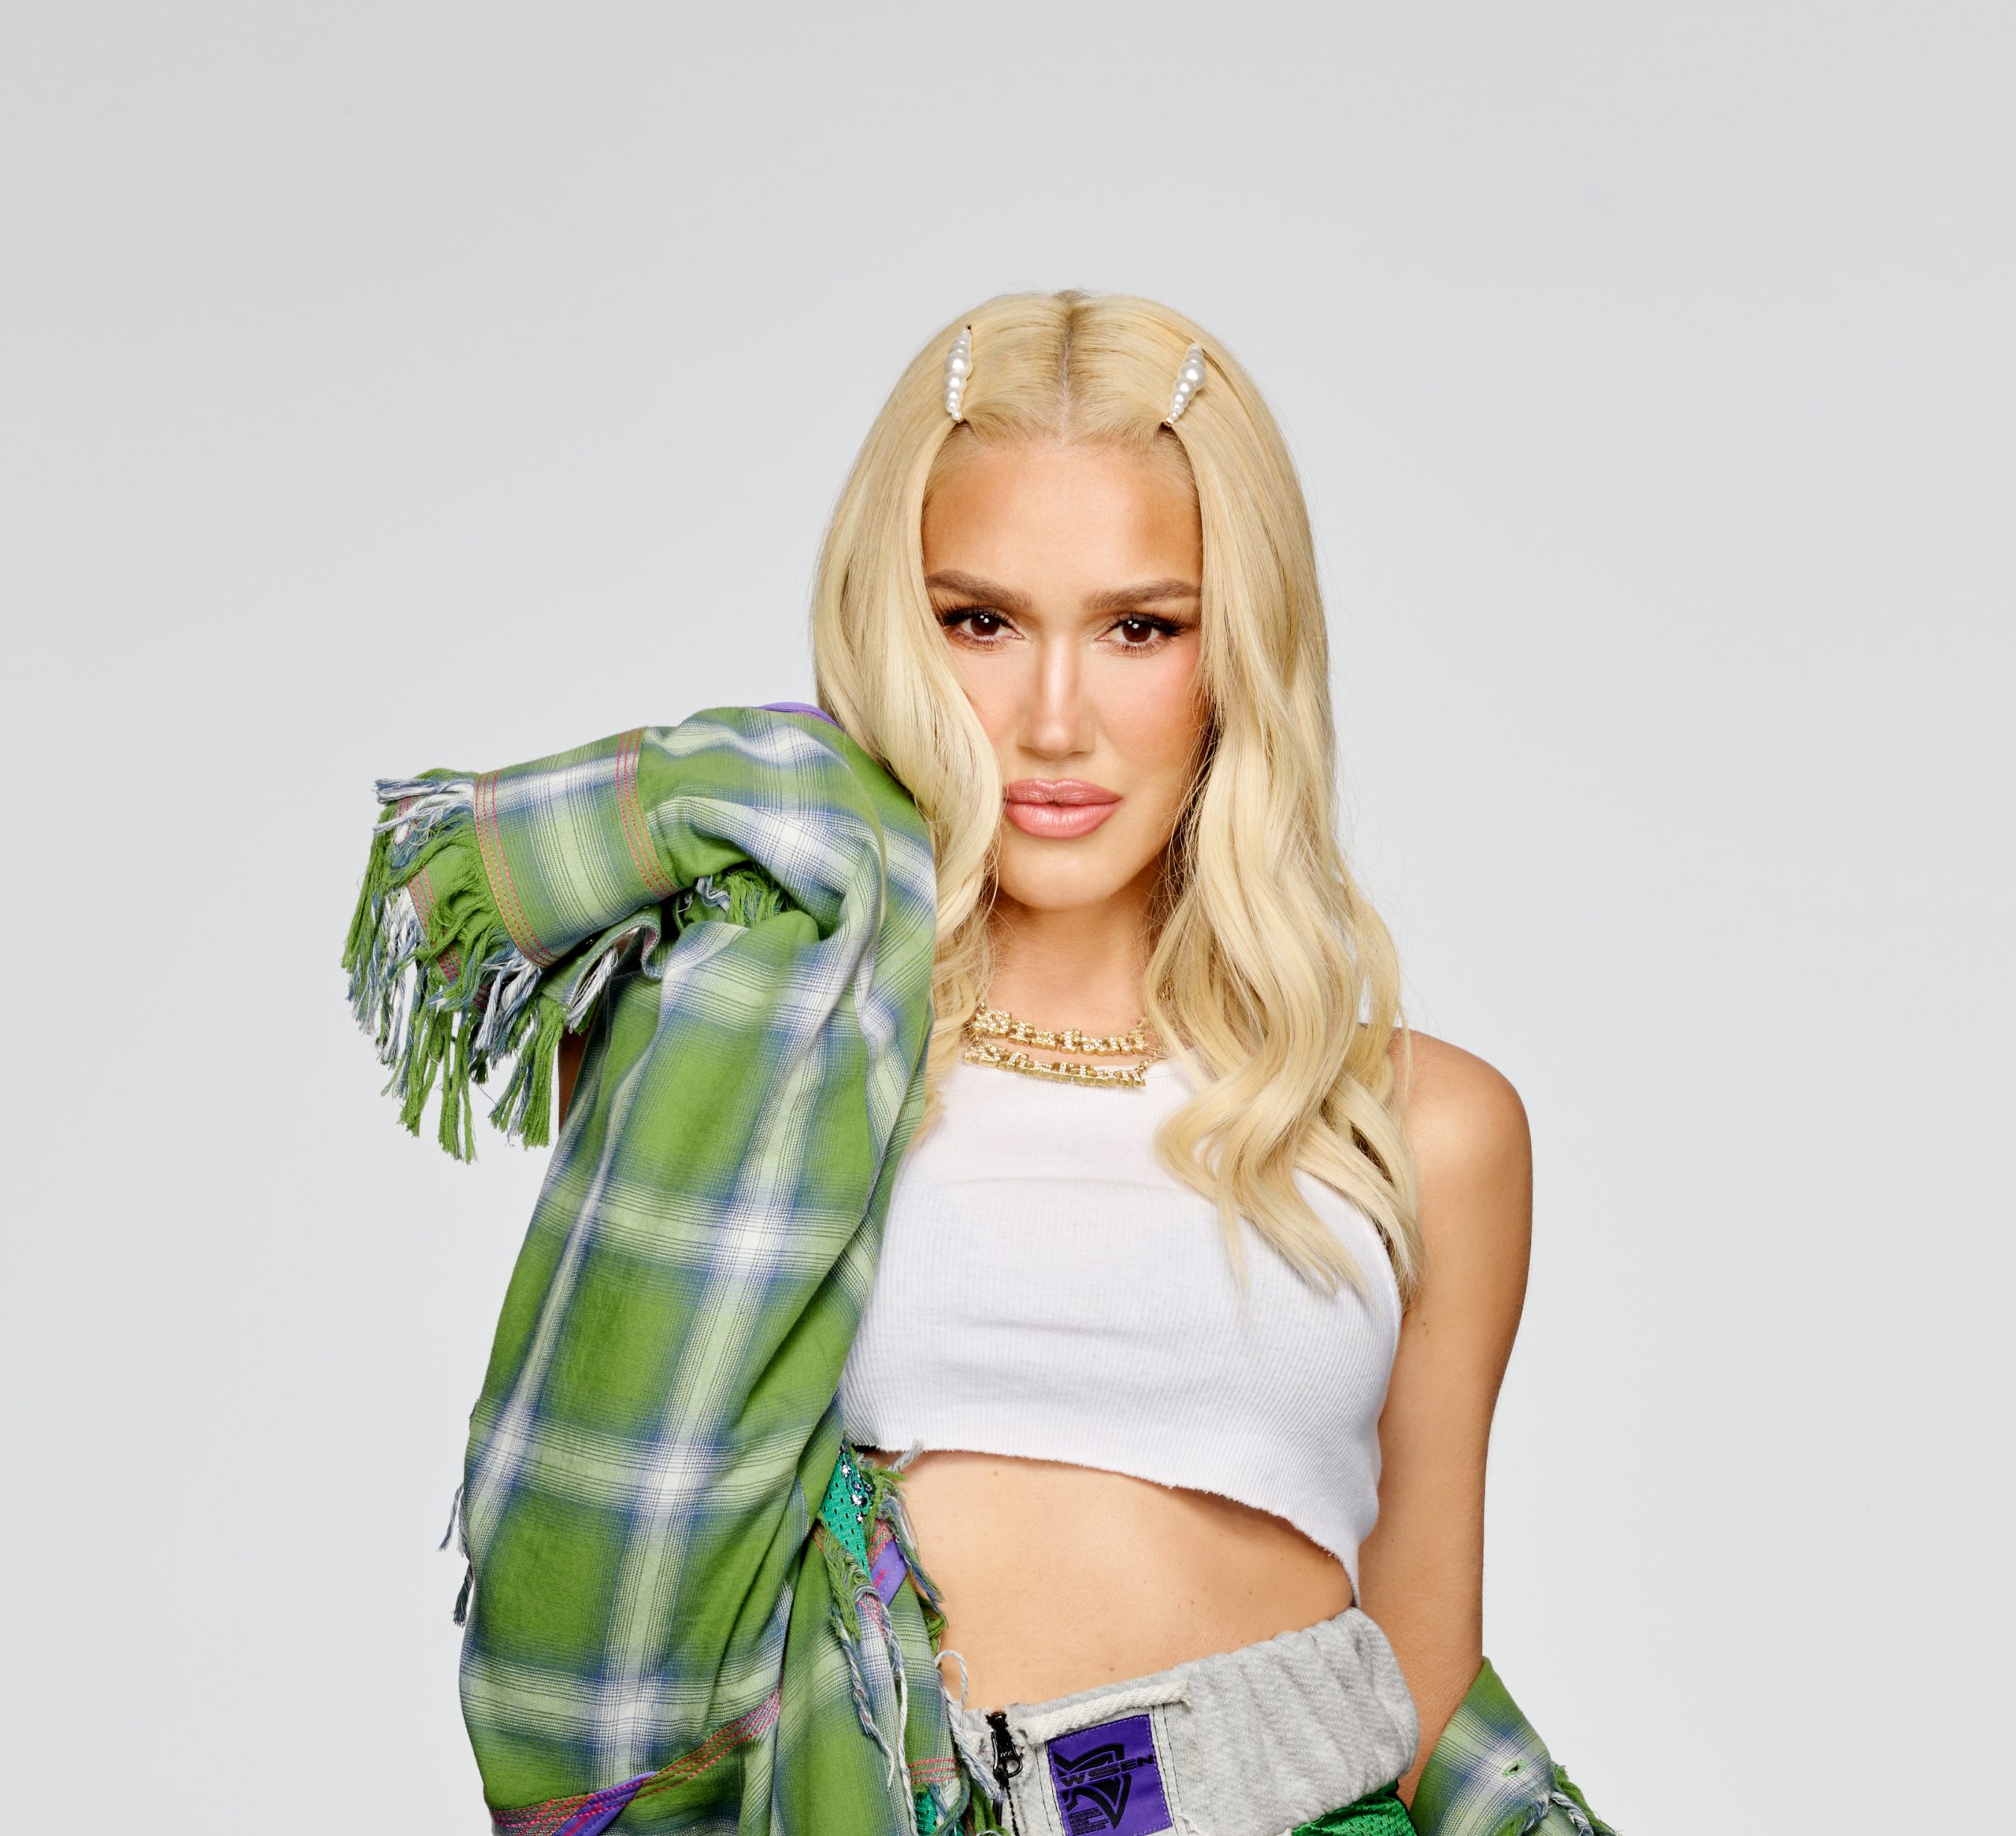 SHE'S JUST A GIRL GETTING A STAR ON THE HOLLYWOOD WALK OF FAME! GLOBAL  MUSIC ICON GWEN STEFANI TO BE HONORED ON OCTOBER 19TH IN CELEBRATION OF HER  BIRTHDAY MONTH - Hollywood